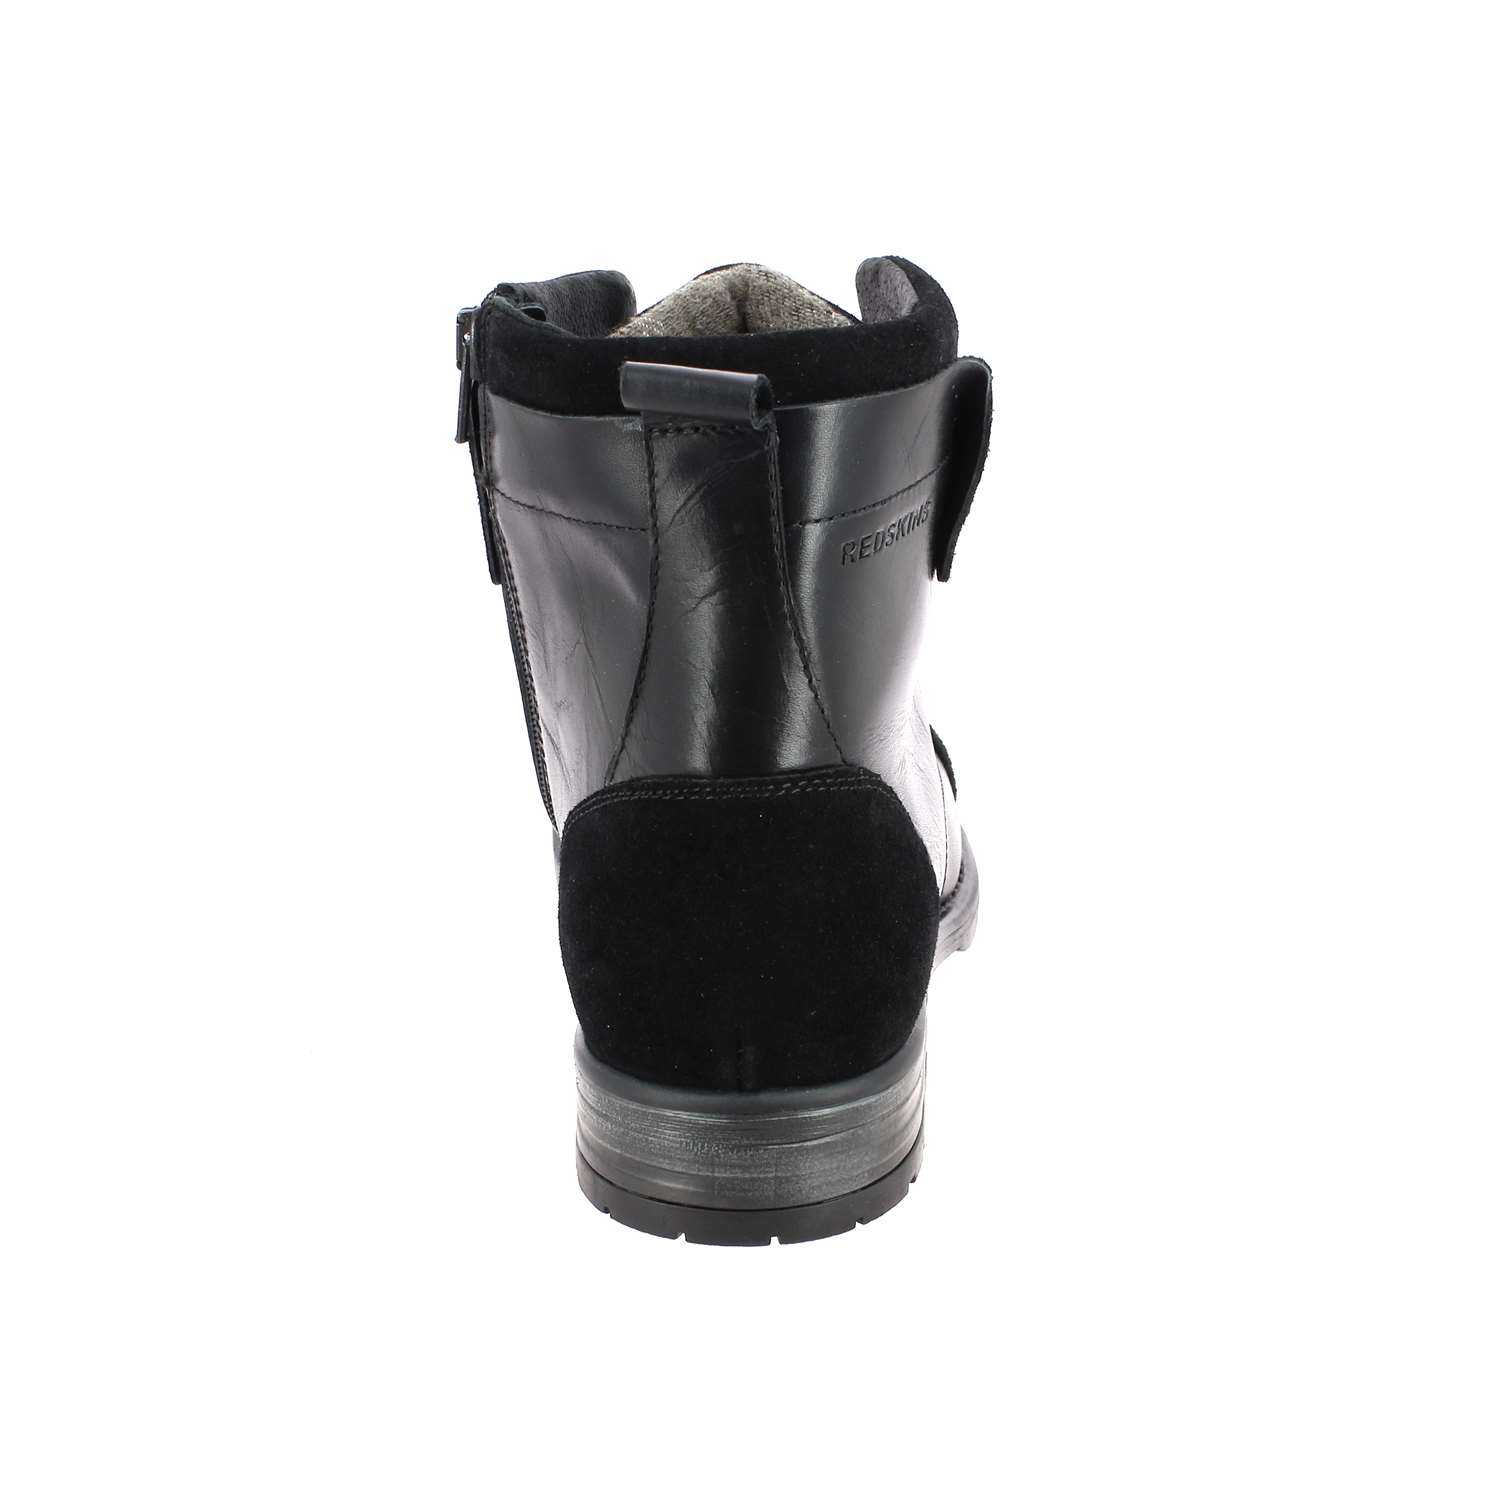 04 - YEDOS -  - Boots et bottines - Cuir